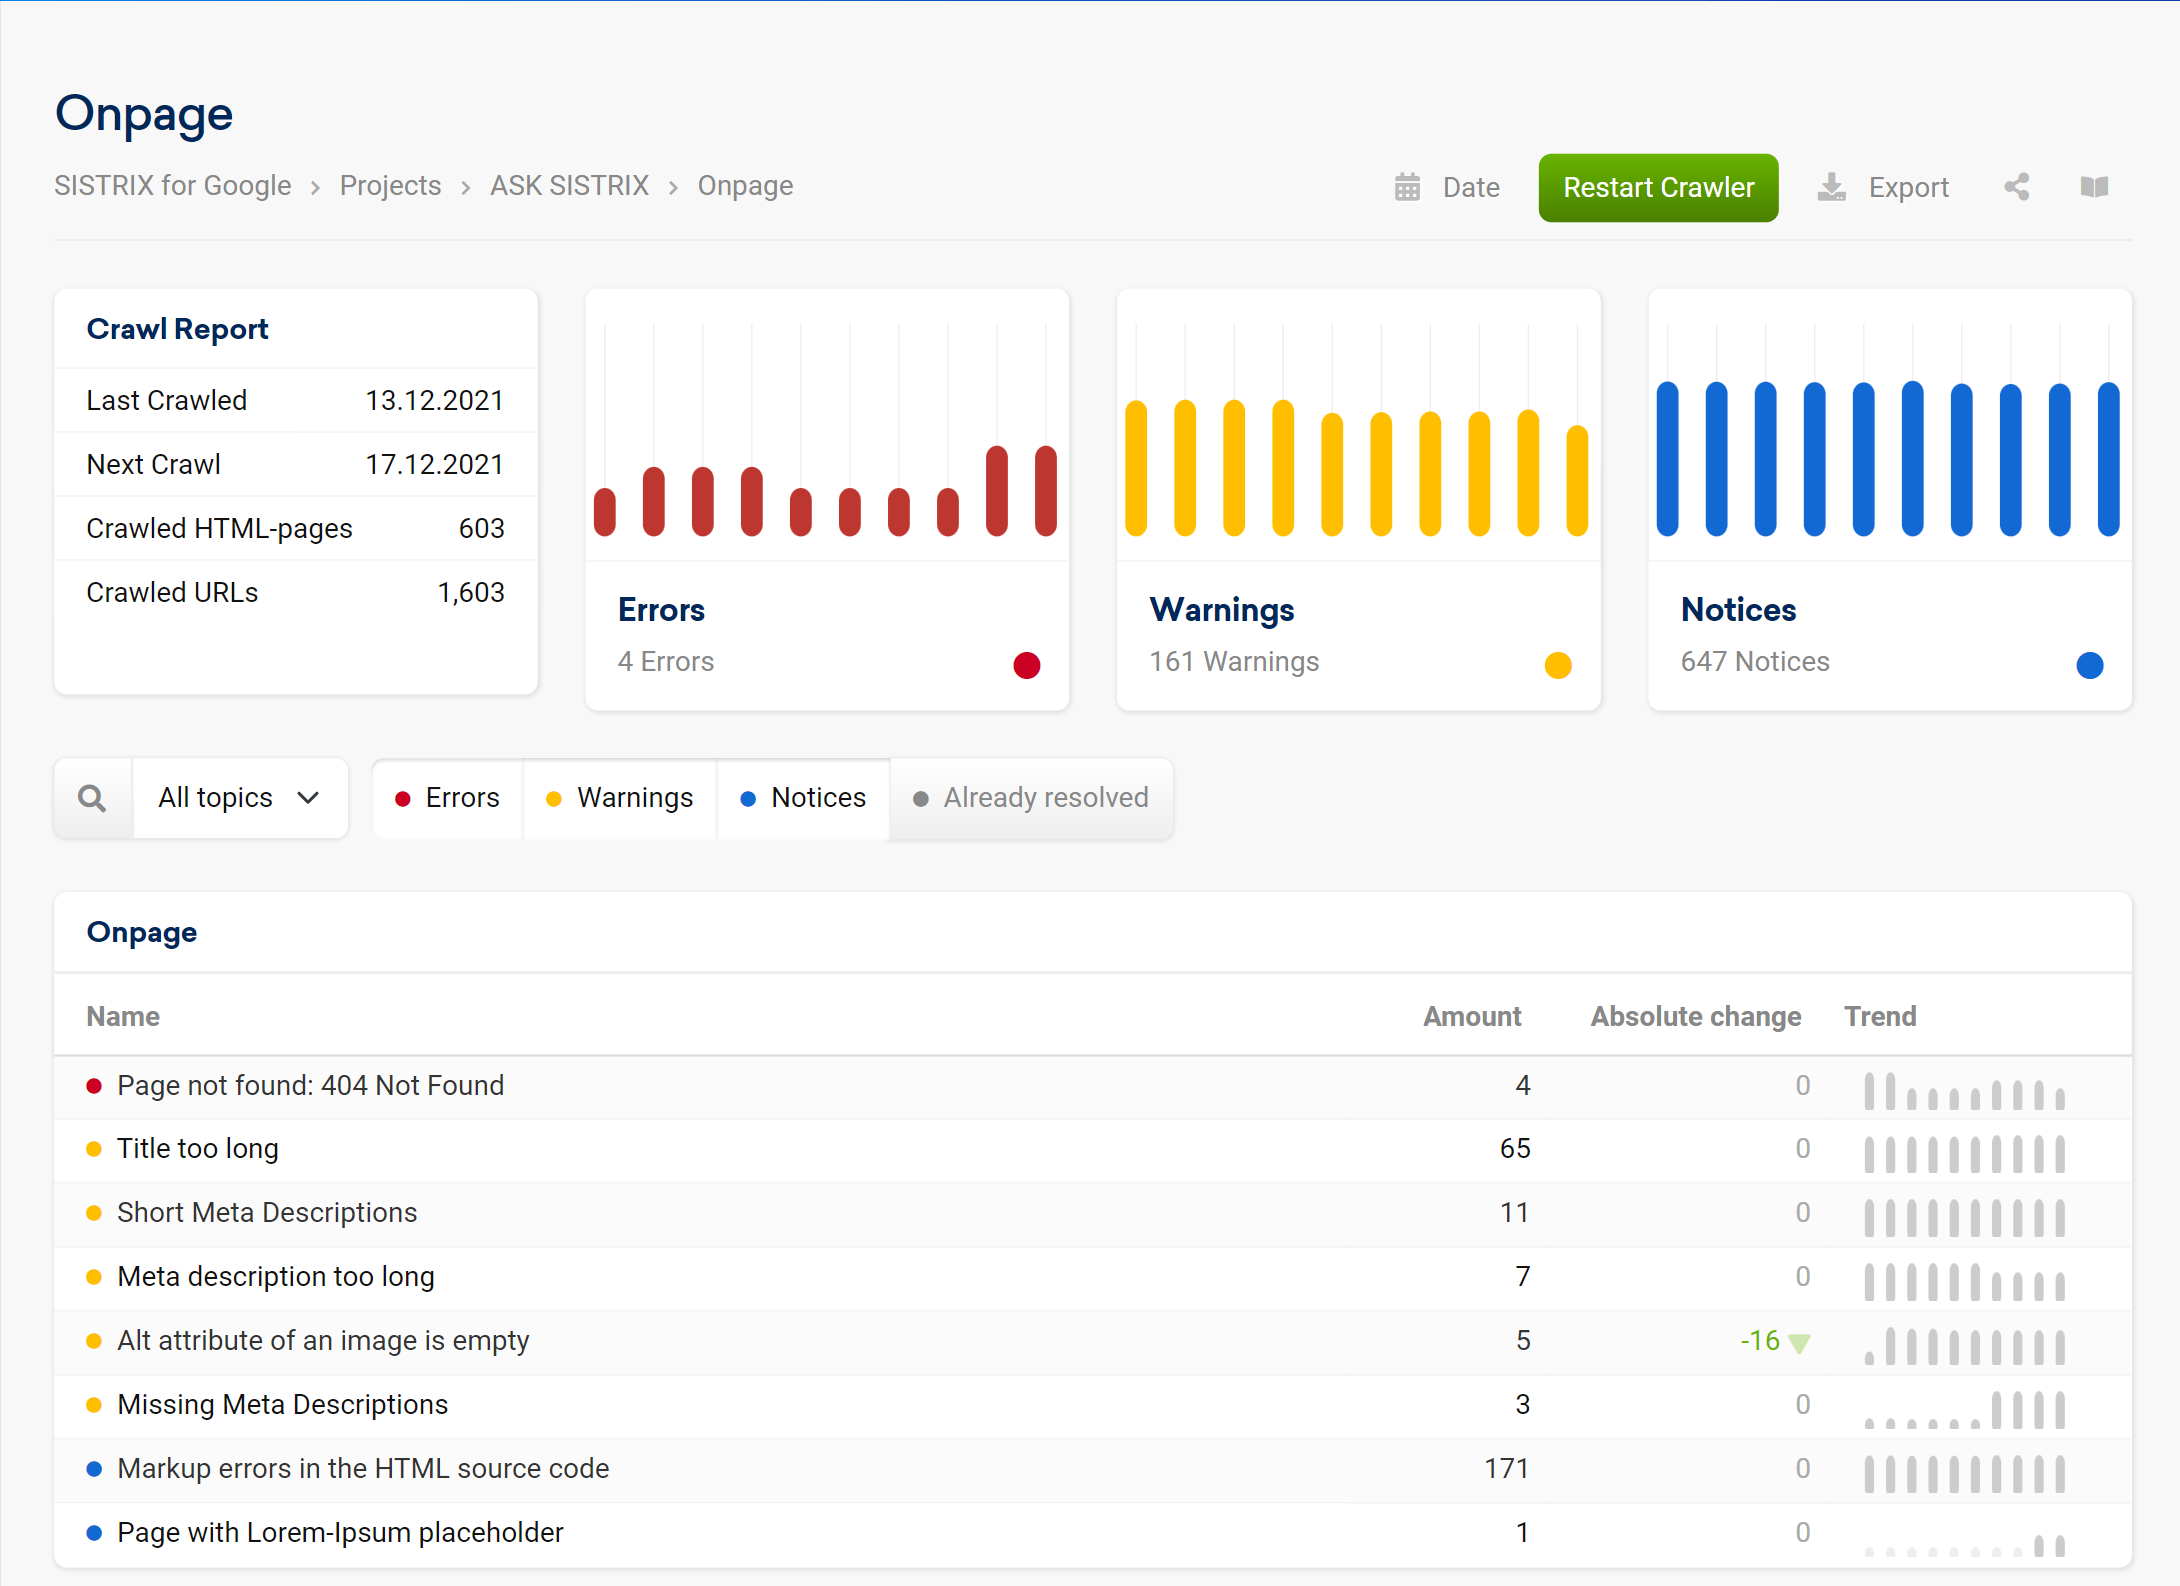 The Onpage analyser overview page has more data, topic prioritisations and a better UI